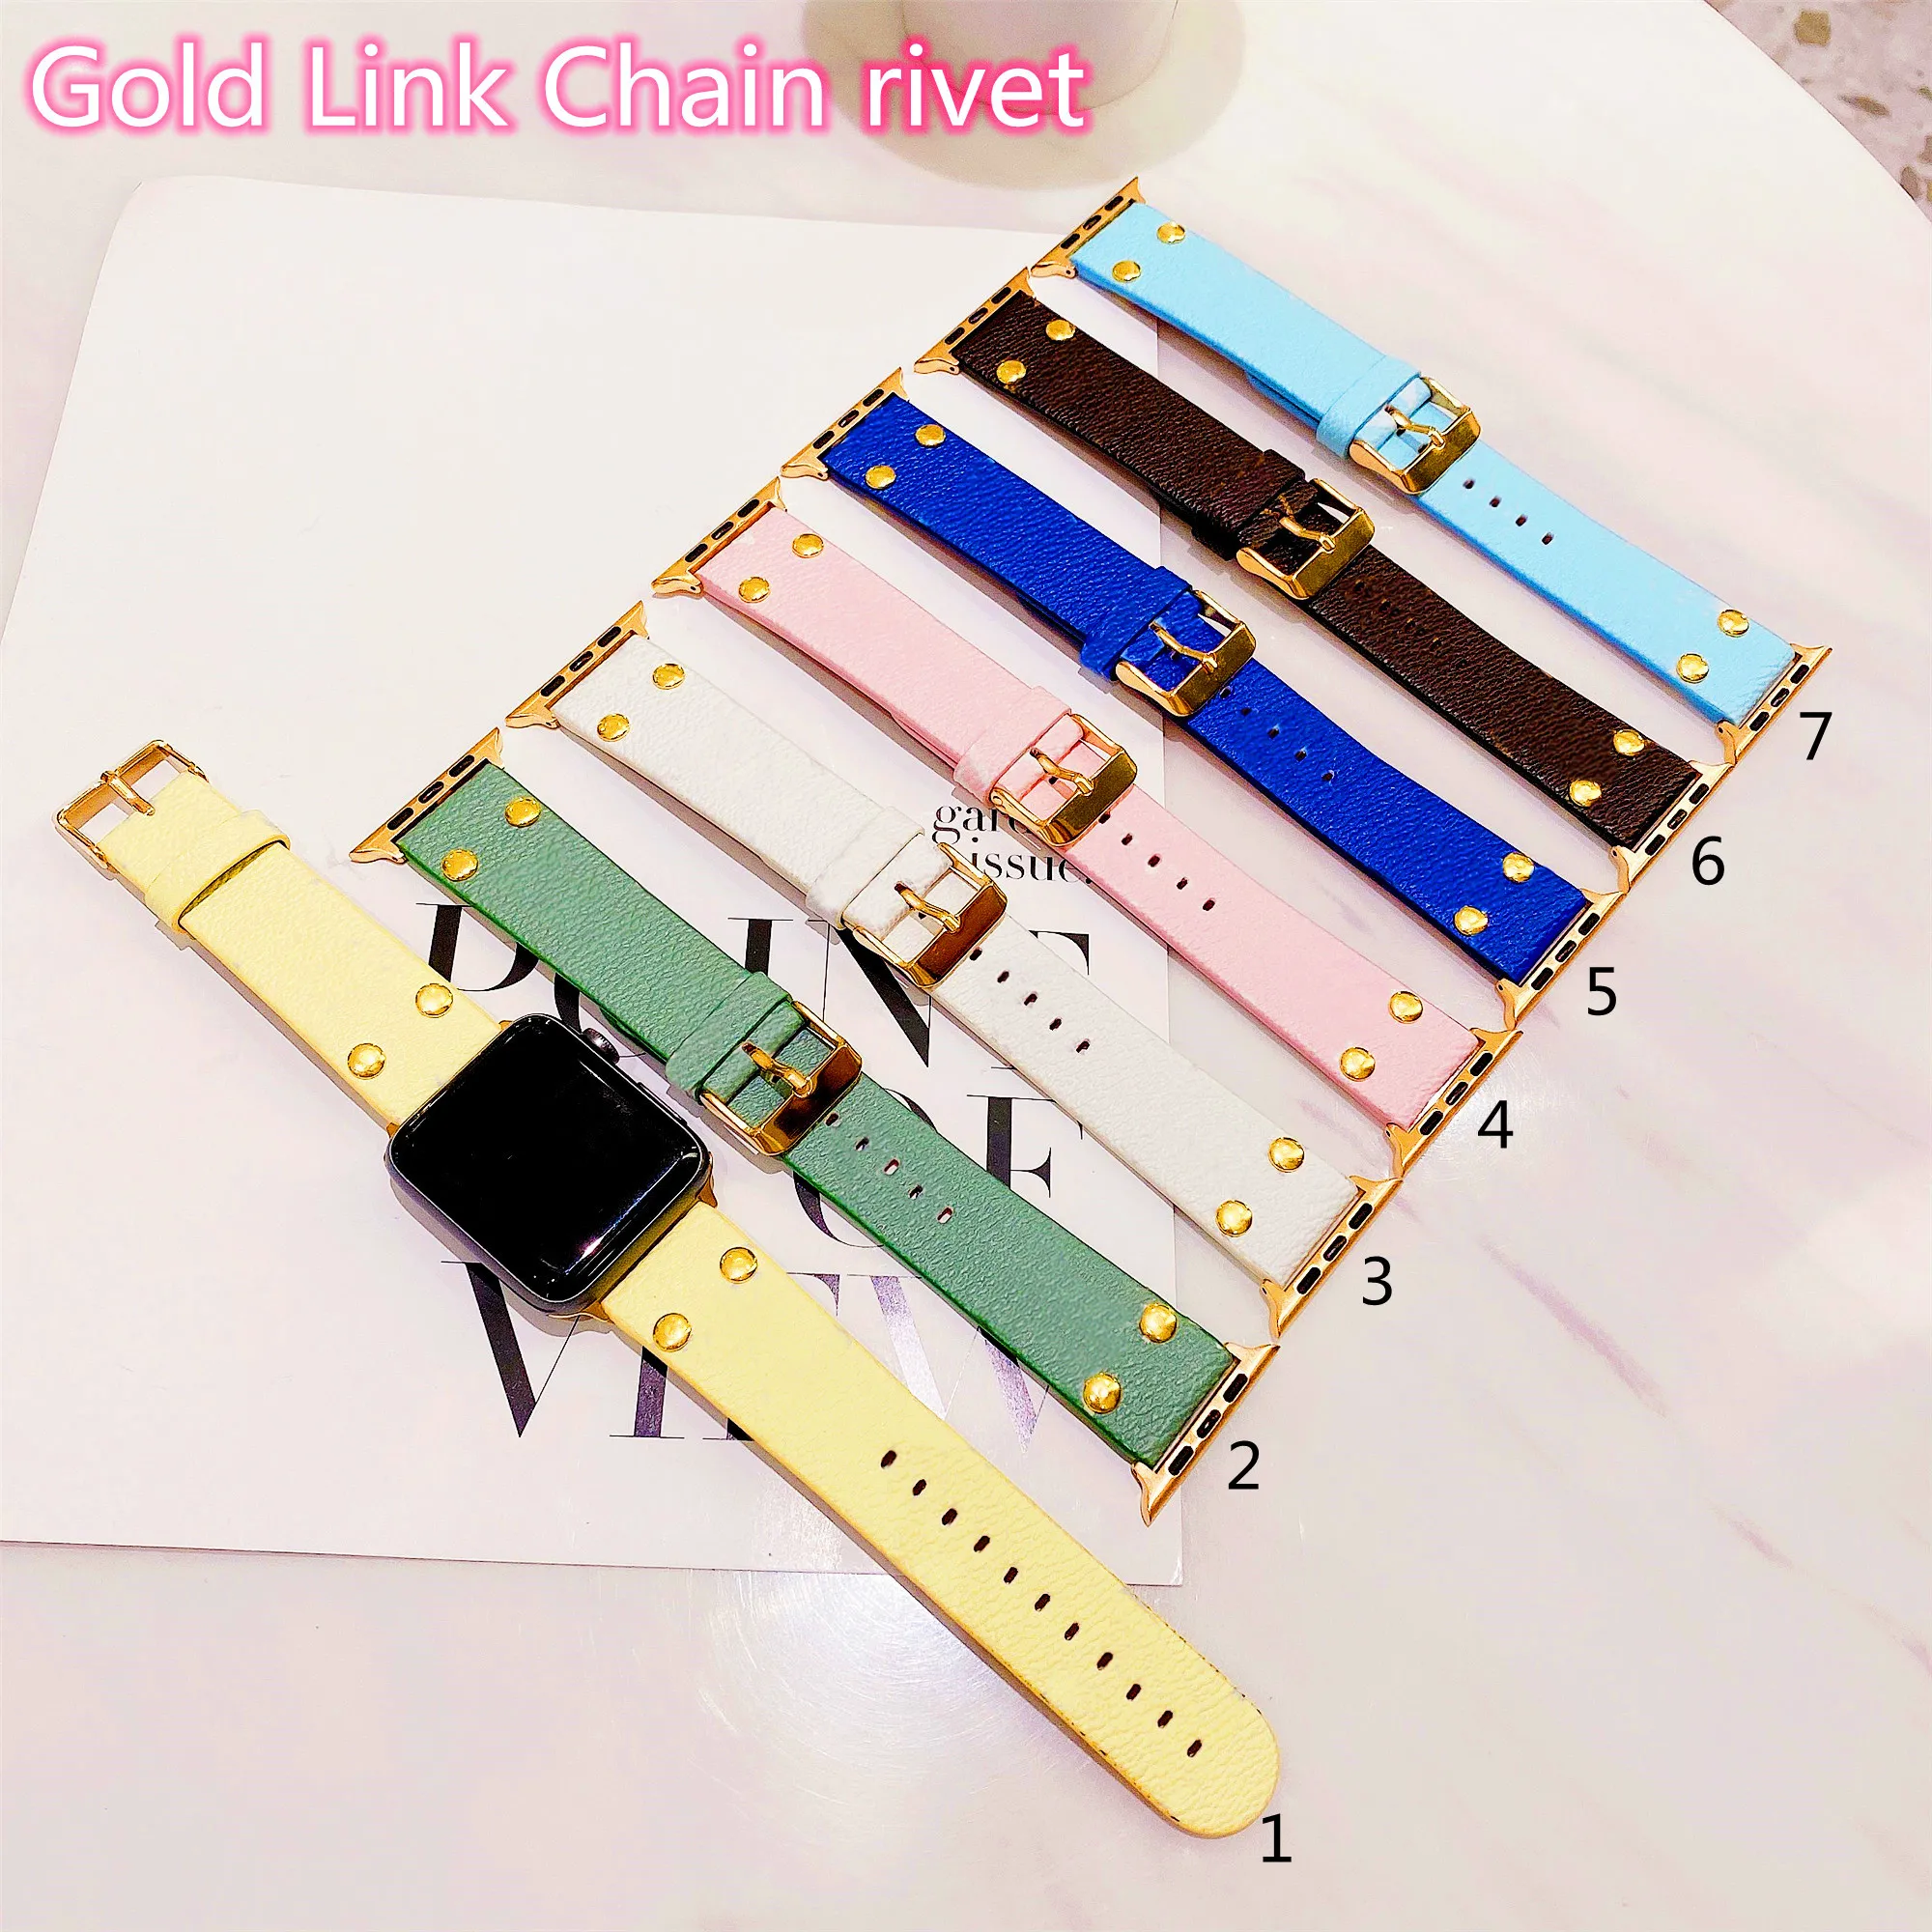 Designer Apple Watch Bands 49mm Leather Watch Strap For Apple Watch Series 8 3 4 5 6 7 9 Smart Straps 38mm 41mm 42mm 44mm 45mm Iwatch Bands Gold Chain Armband AP Watchbands